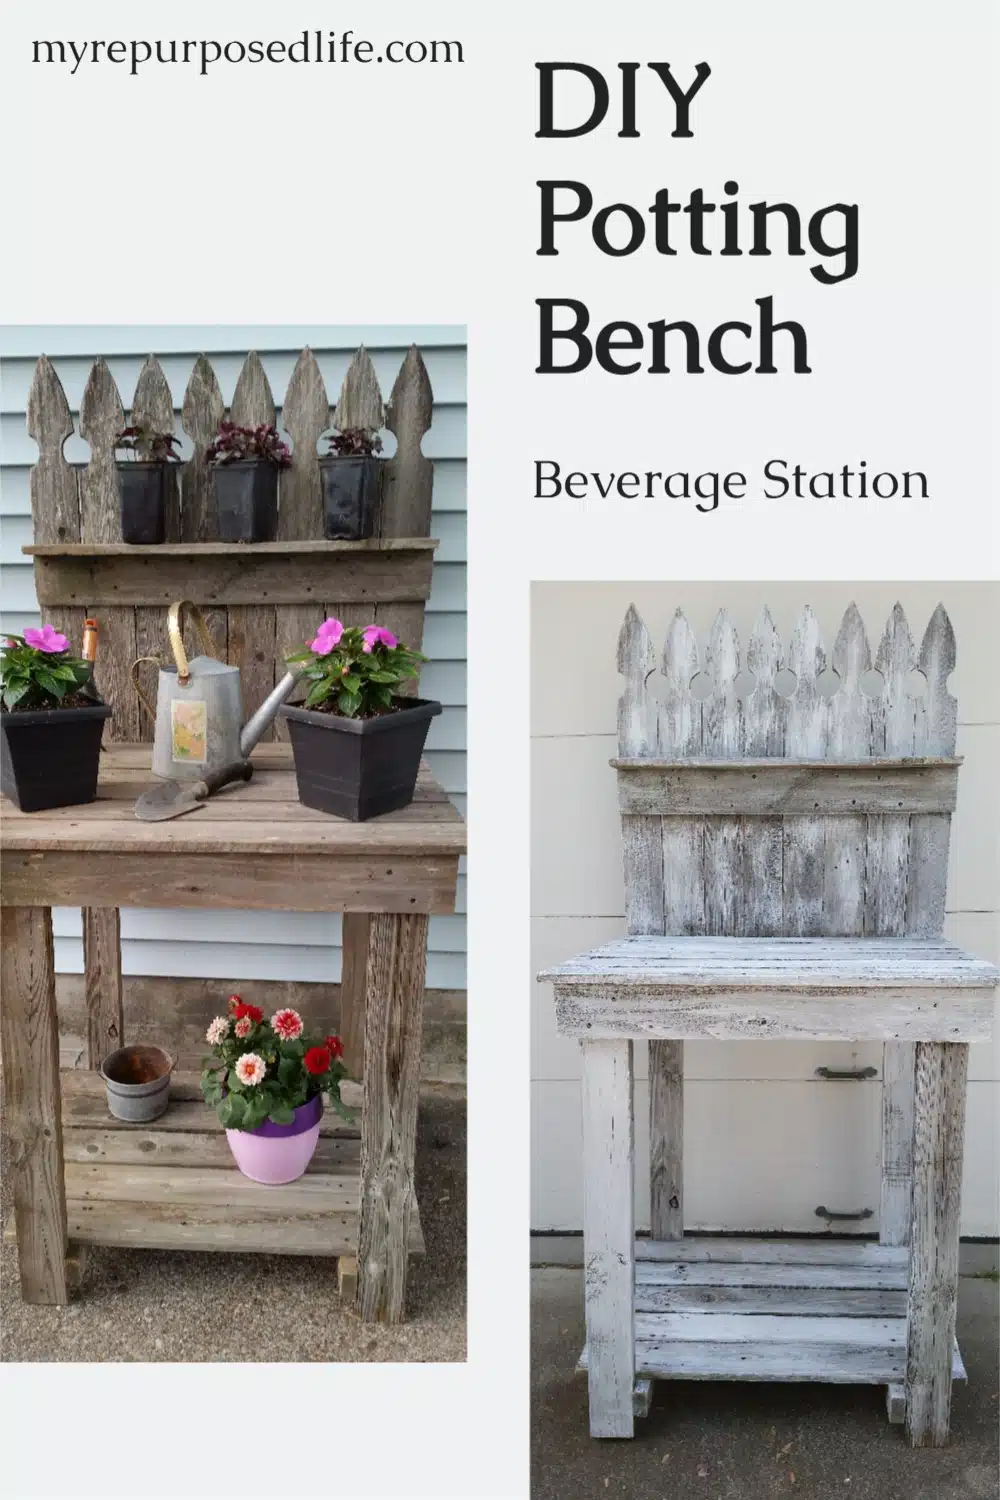 How to make your own reclaimed wood potting bench out of old fencing. This easy project also makes the perfect outdoor beverage station. #MyRepurposedLife #repurposed #outdoor #pottingbench #beveragestation #diy via @repurposedlife